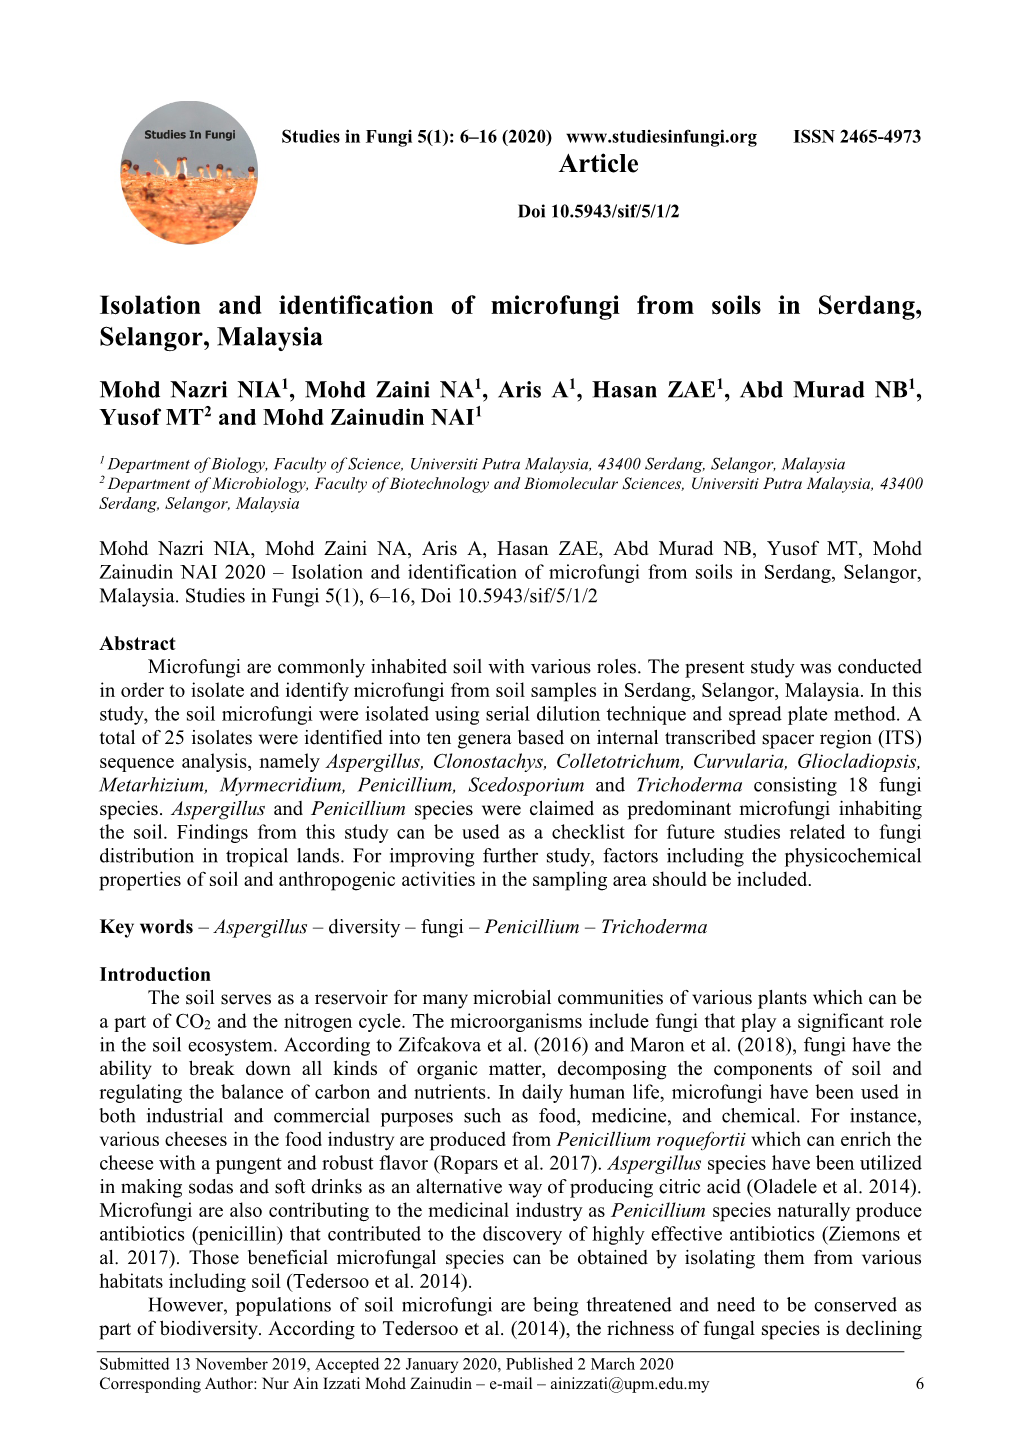 Isolation and Identification of Microfungi from Soils in Serdang, Selangor, Malaysia Article